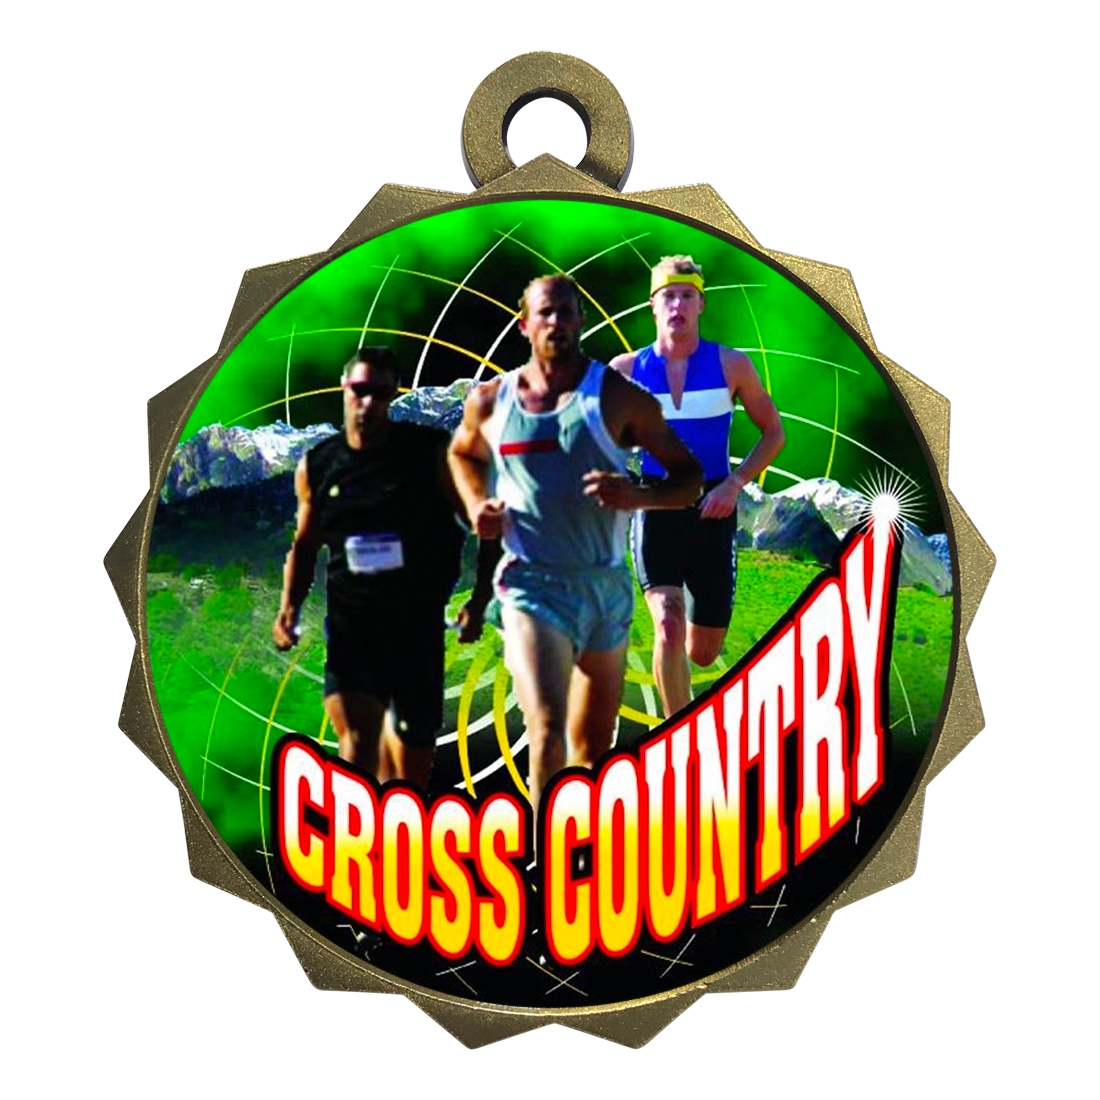 2-1/4" Male Cross Country Medal